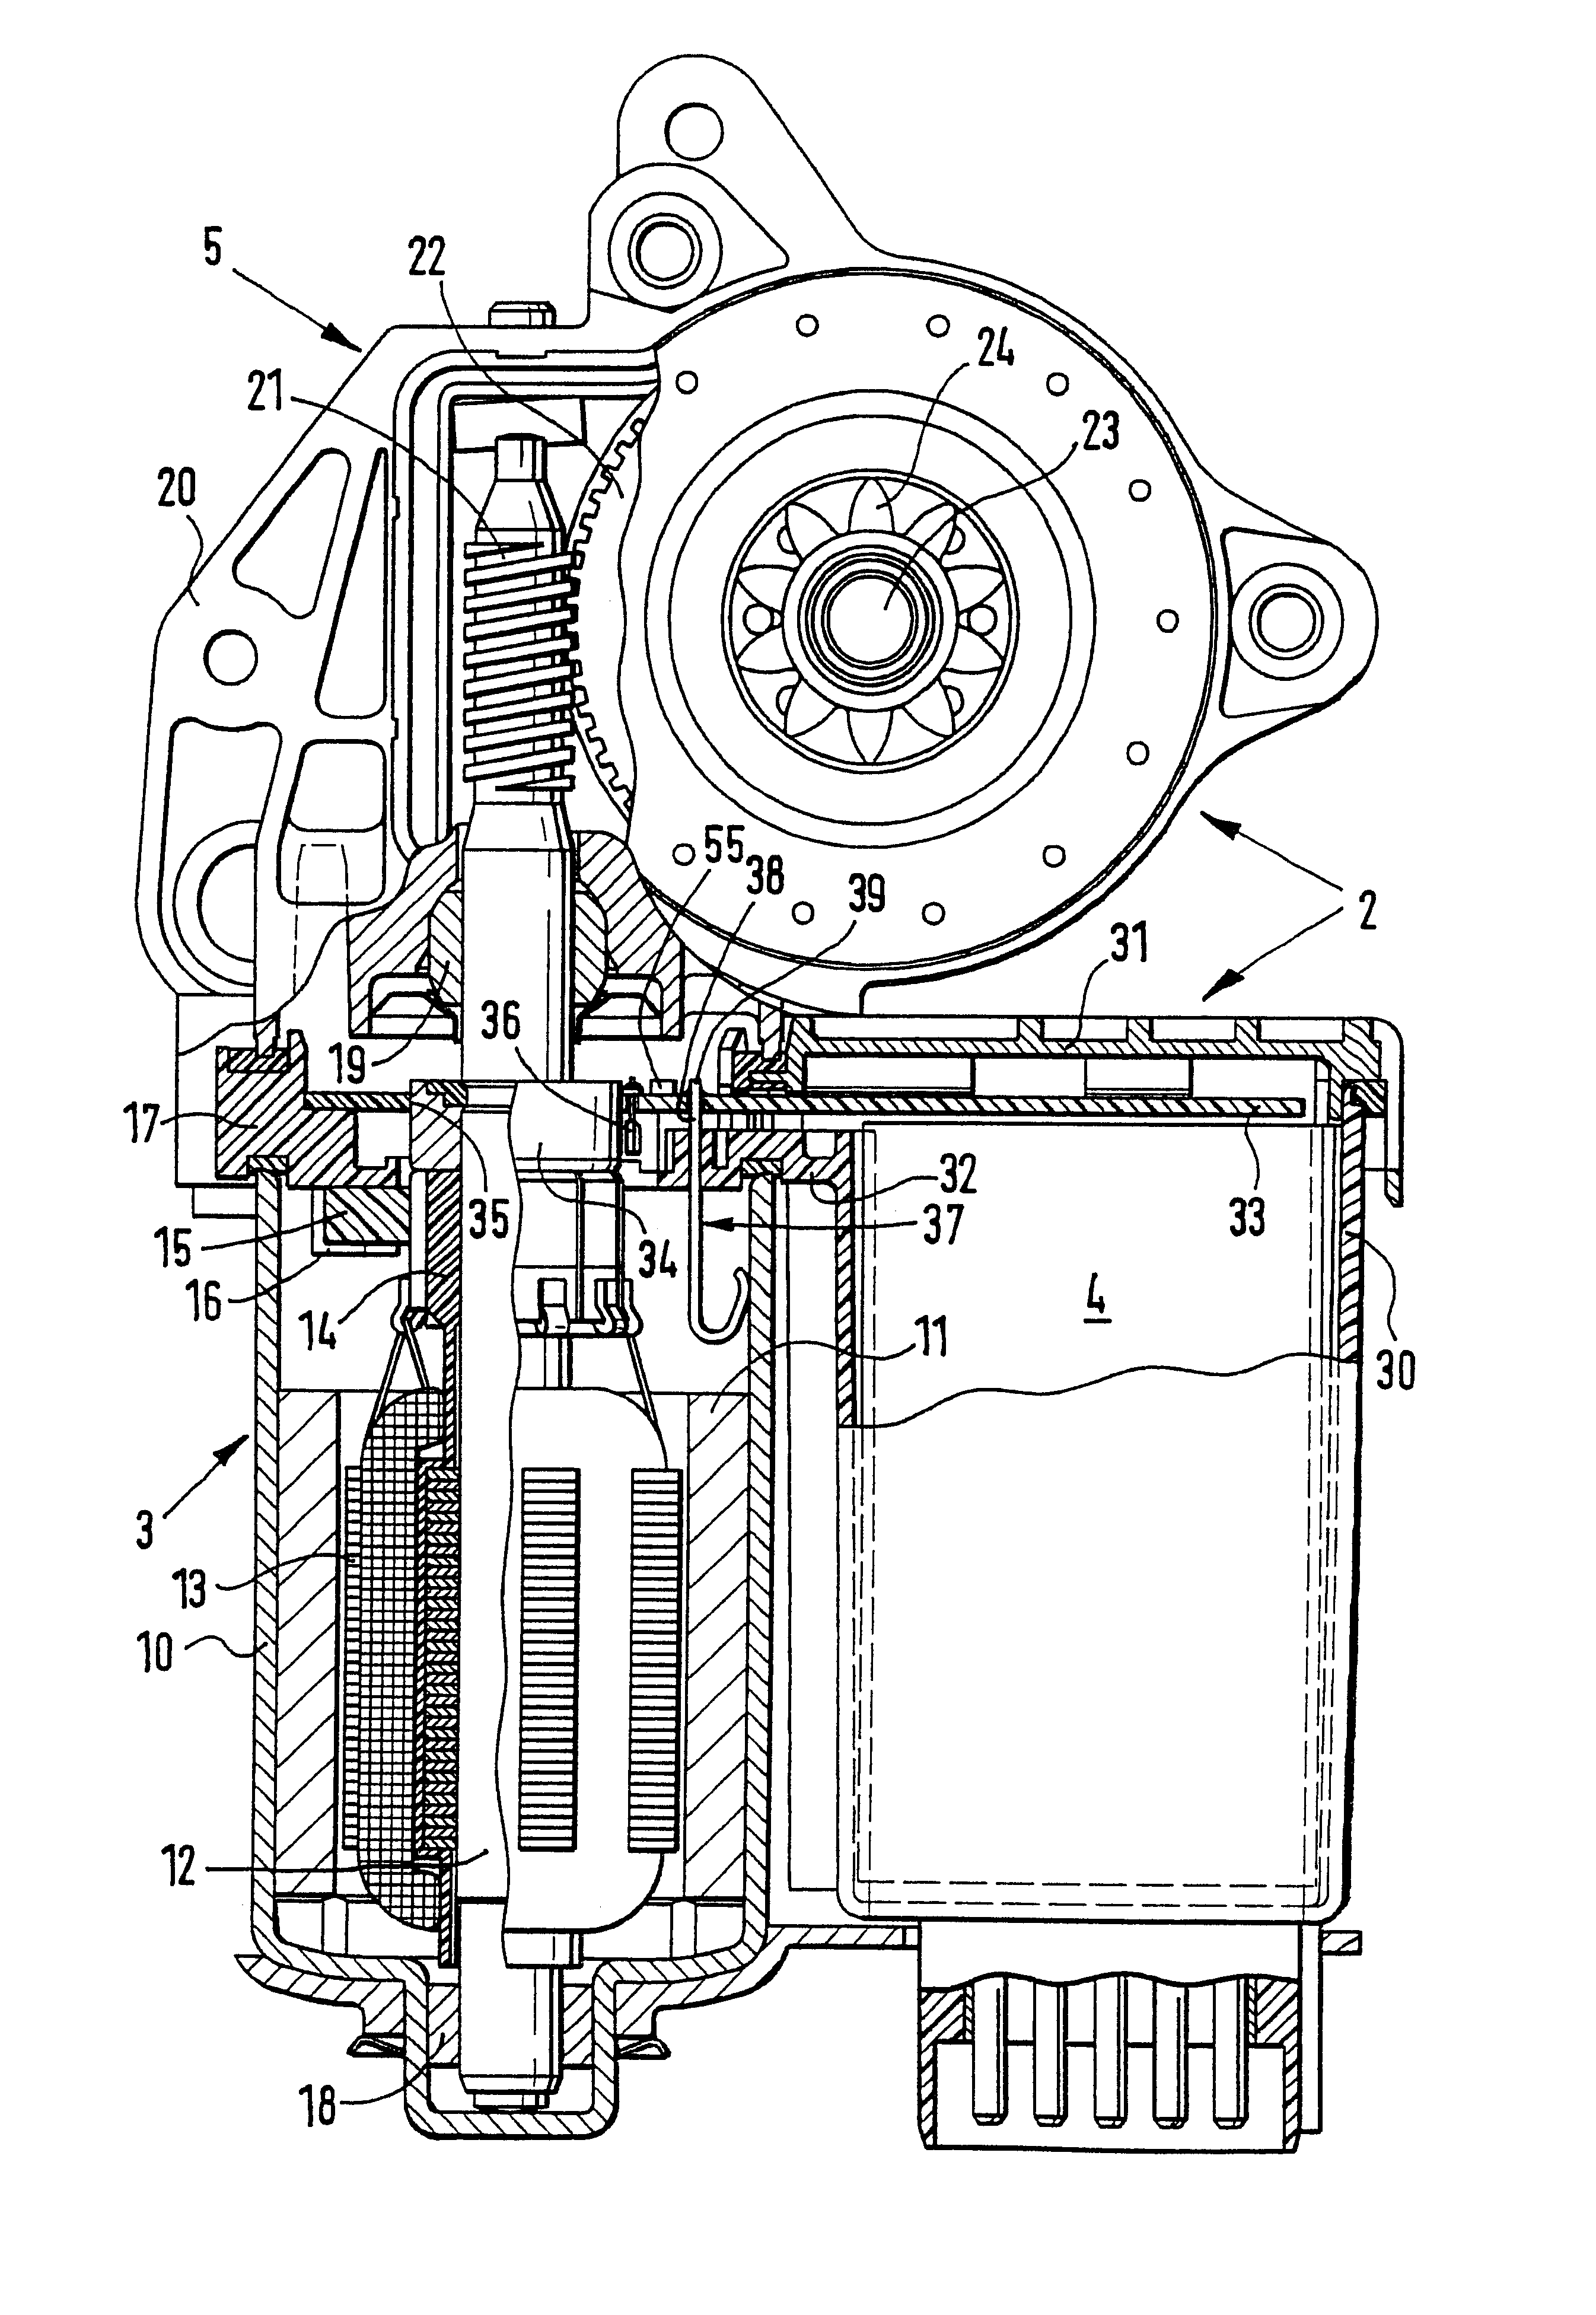 Actuating drive with an electric motor and control electronics